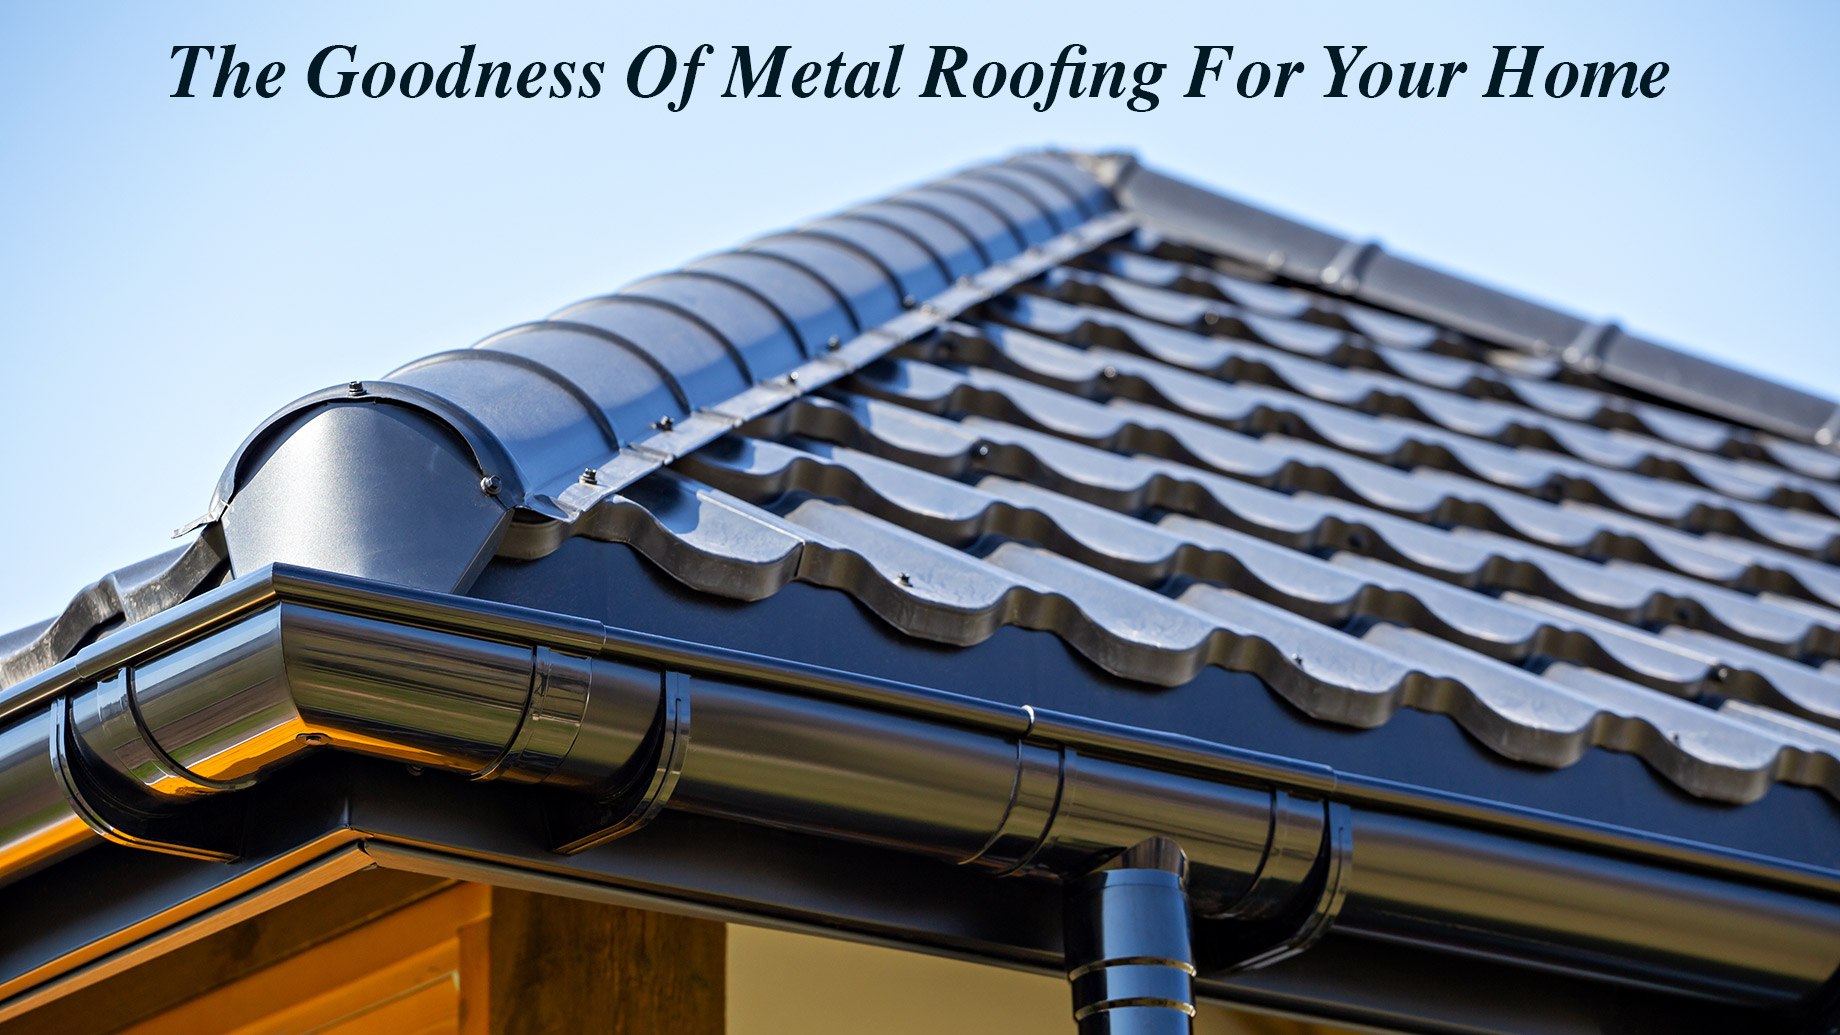 The Goodness Of Metal Roofing For Your Home